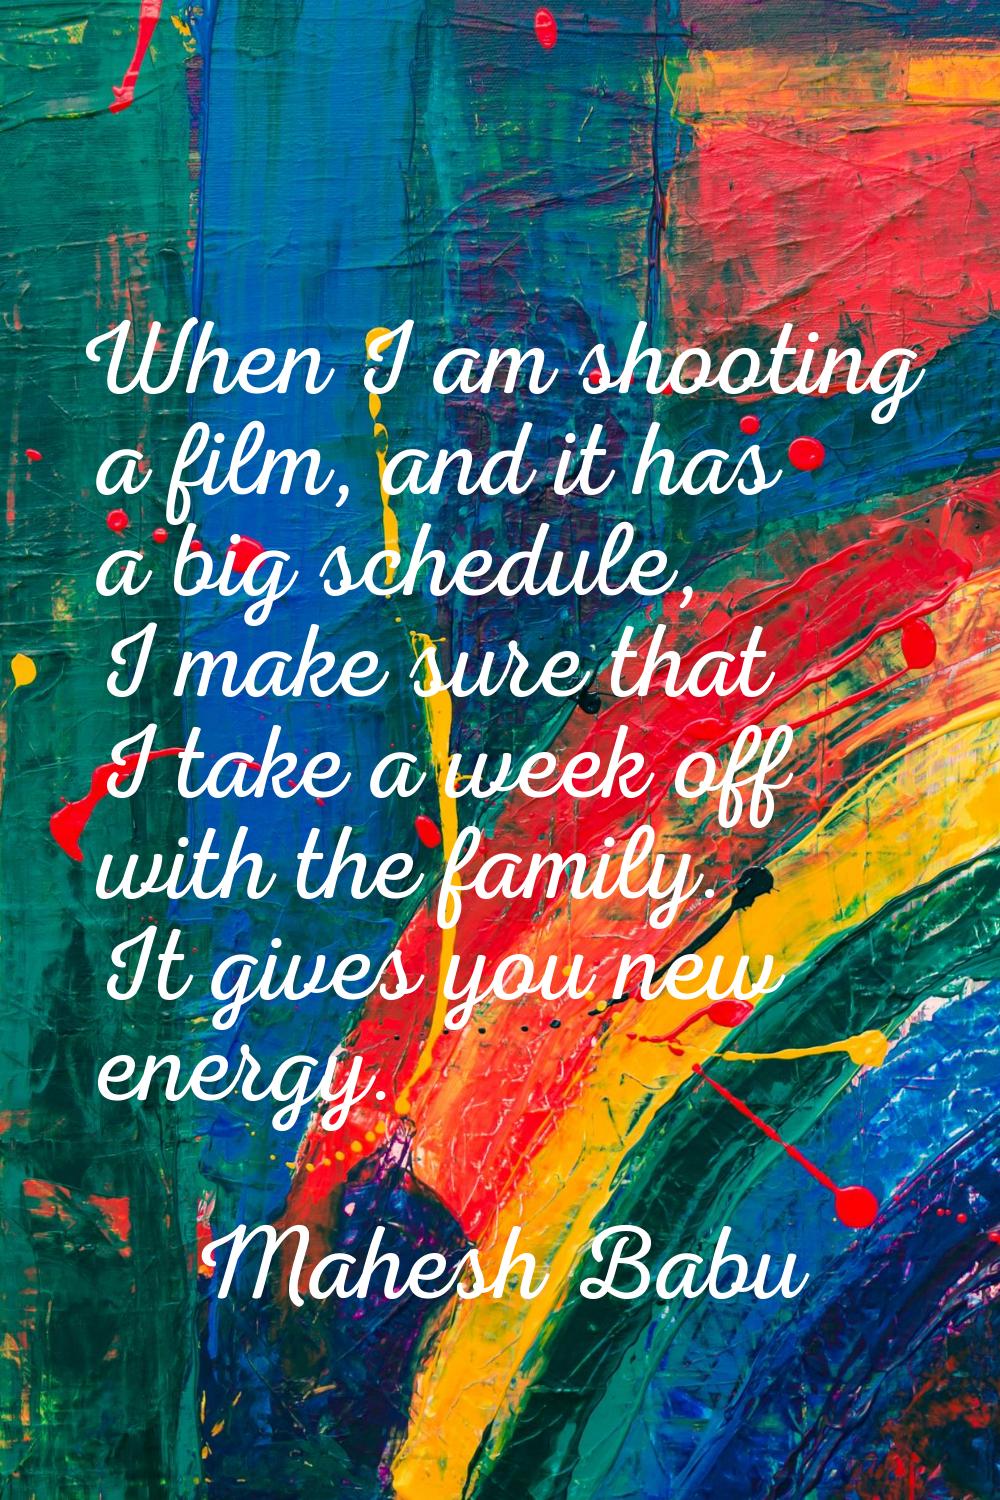 When I am shooting a film, and it has a big schedule, I make sure that I take a week off with the f